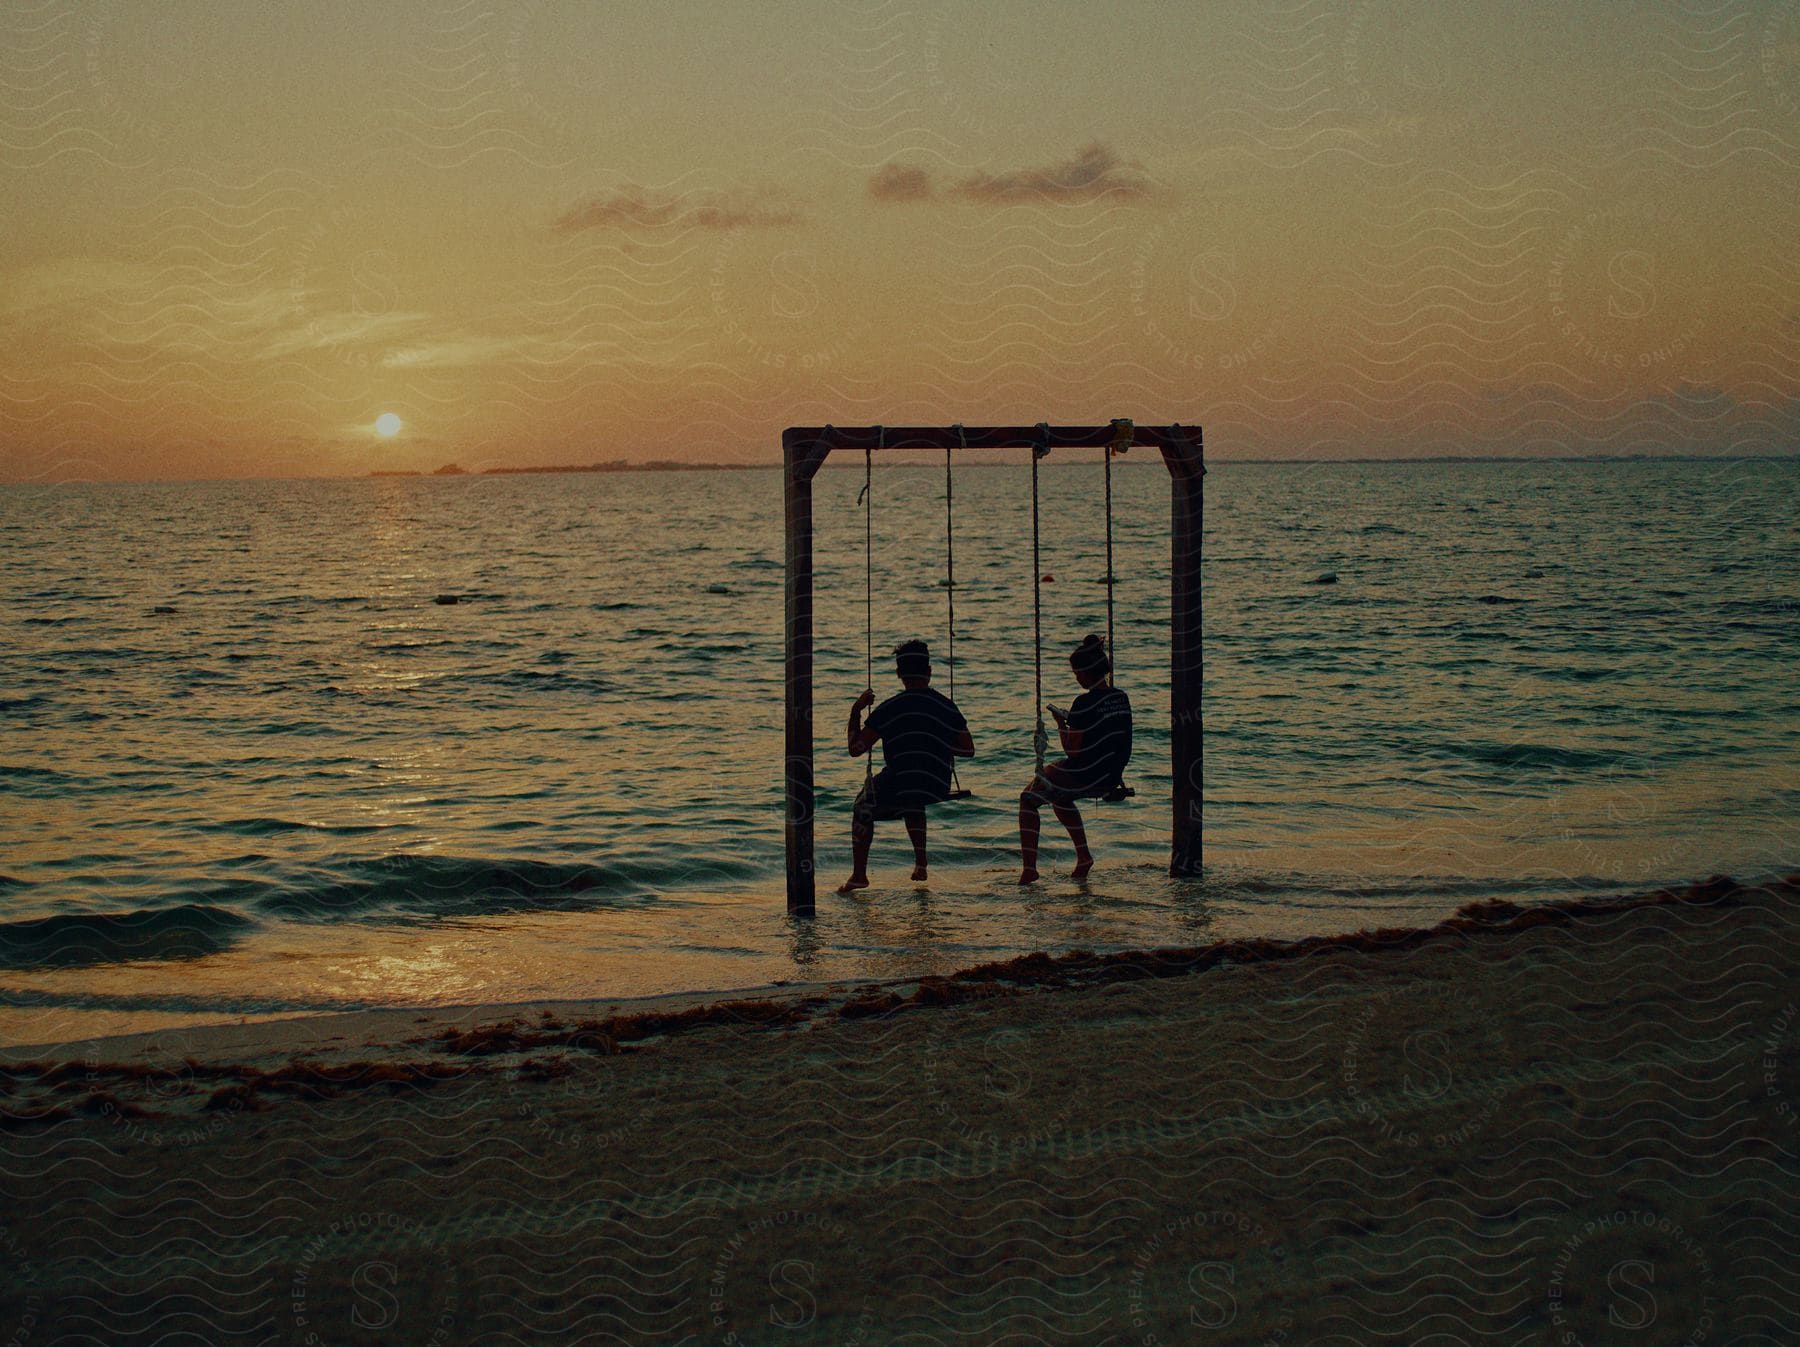 Two boys sitting with their backs to a seashore swing against the light on a beach at dusk